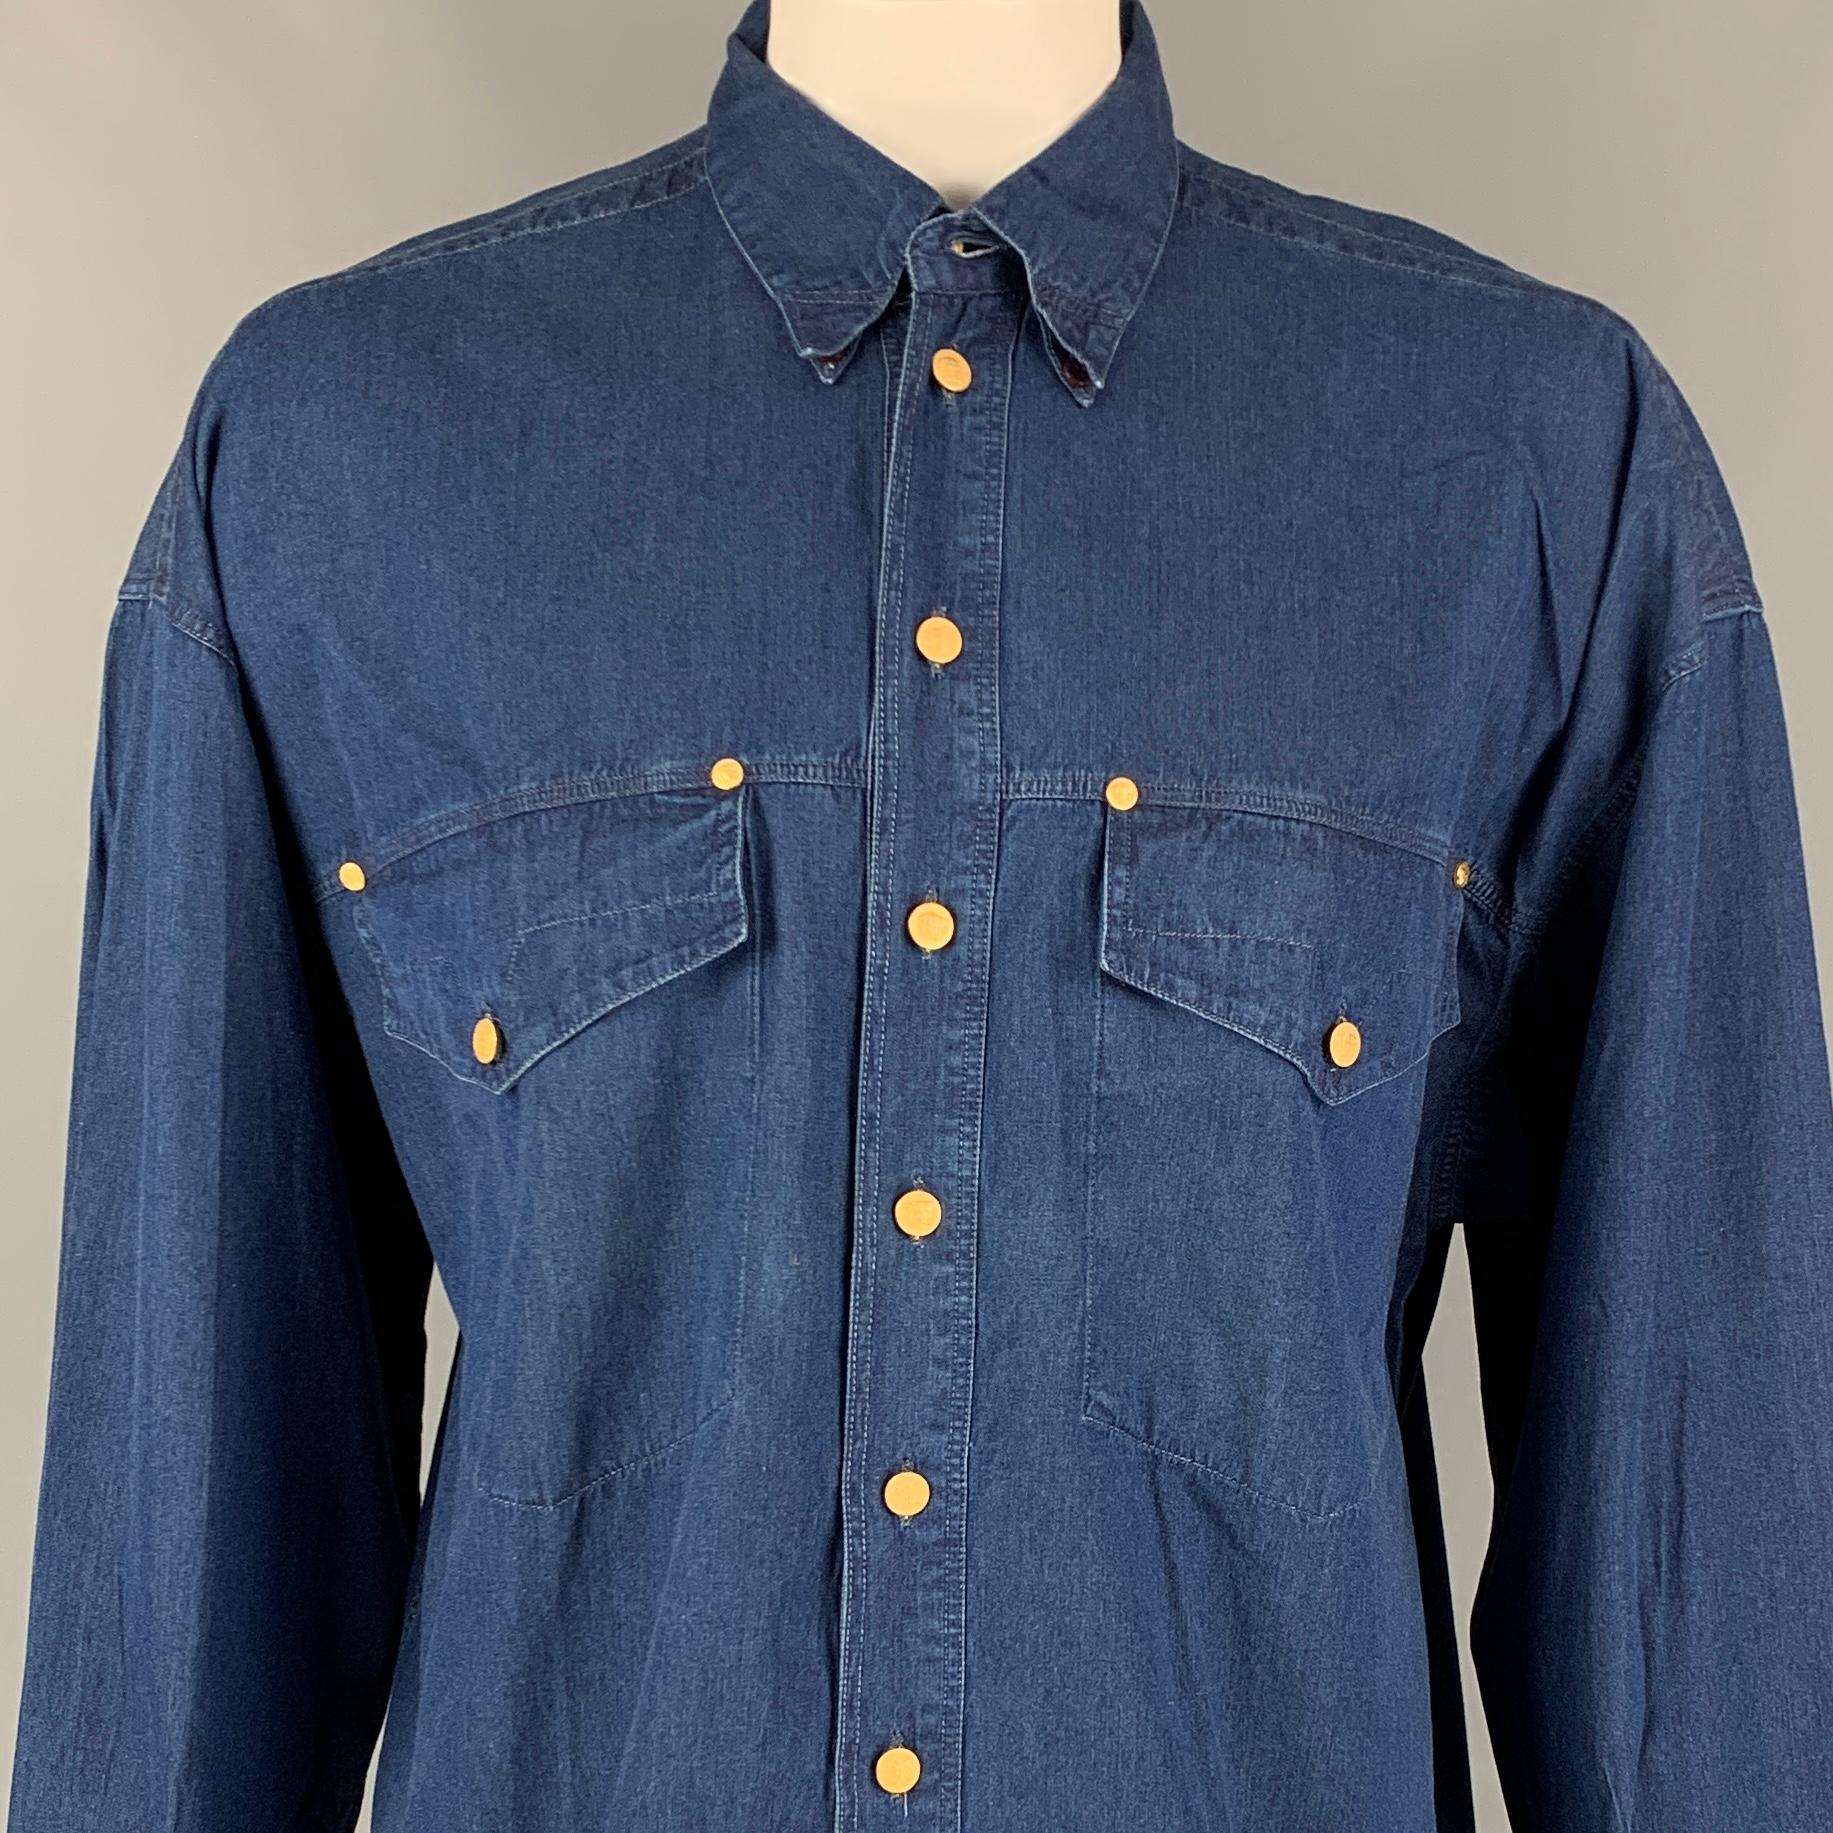 Vintage VERSACE JEANS COUTURE long sleeve shirt comes in a indigo cotton featuring a oversized fit, front pockets, pointed collar, gold tone medusa buttons, and a buttoned closure. Made in Italy. 

Very Good Pre-Owned Condition.
Marked: XL
Original 